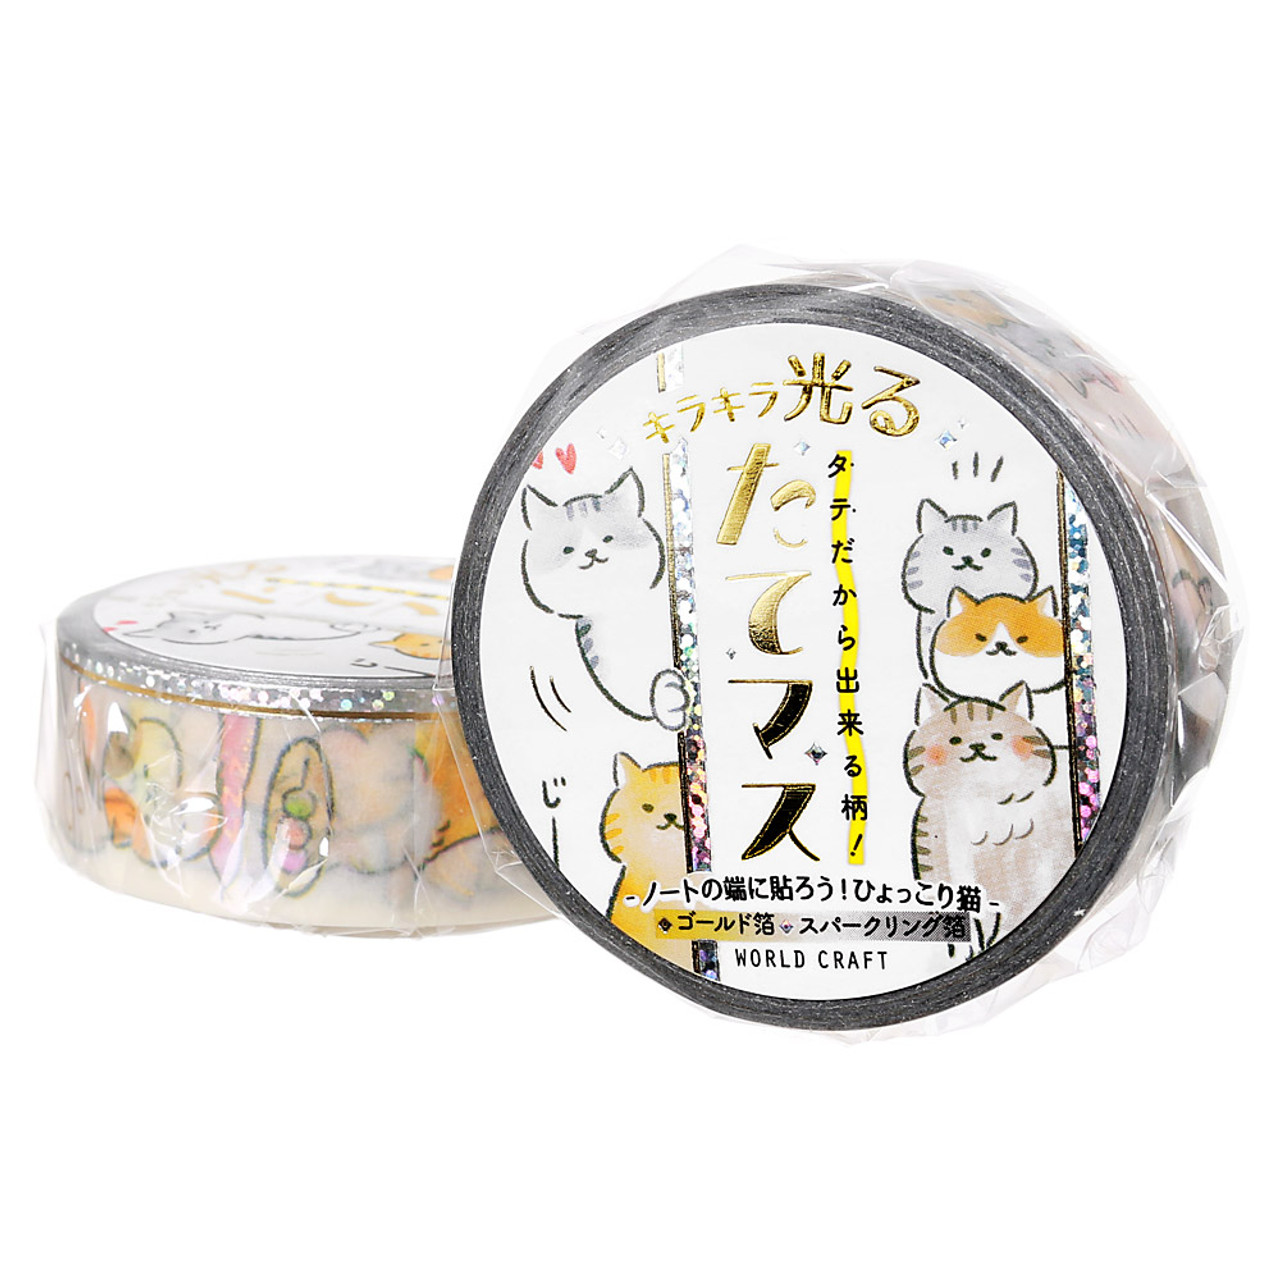 World Craft Cats Glitter Vertical Masking Tape 15mm x 5m ( Front View )